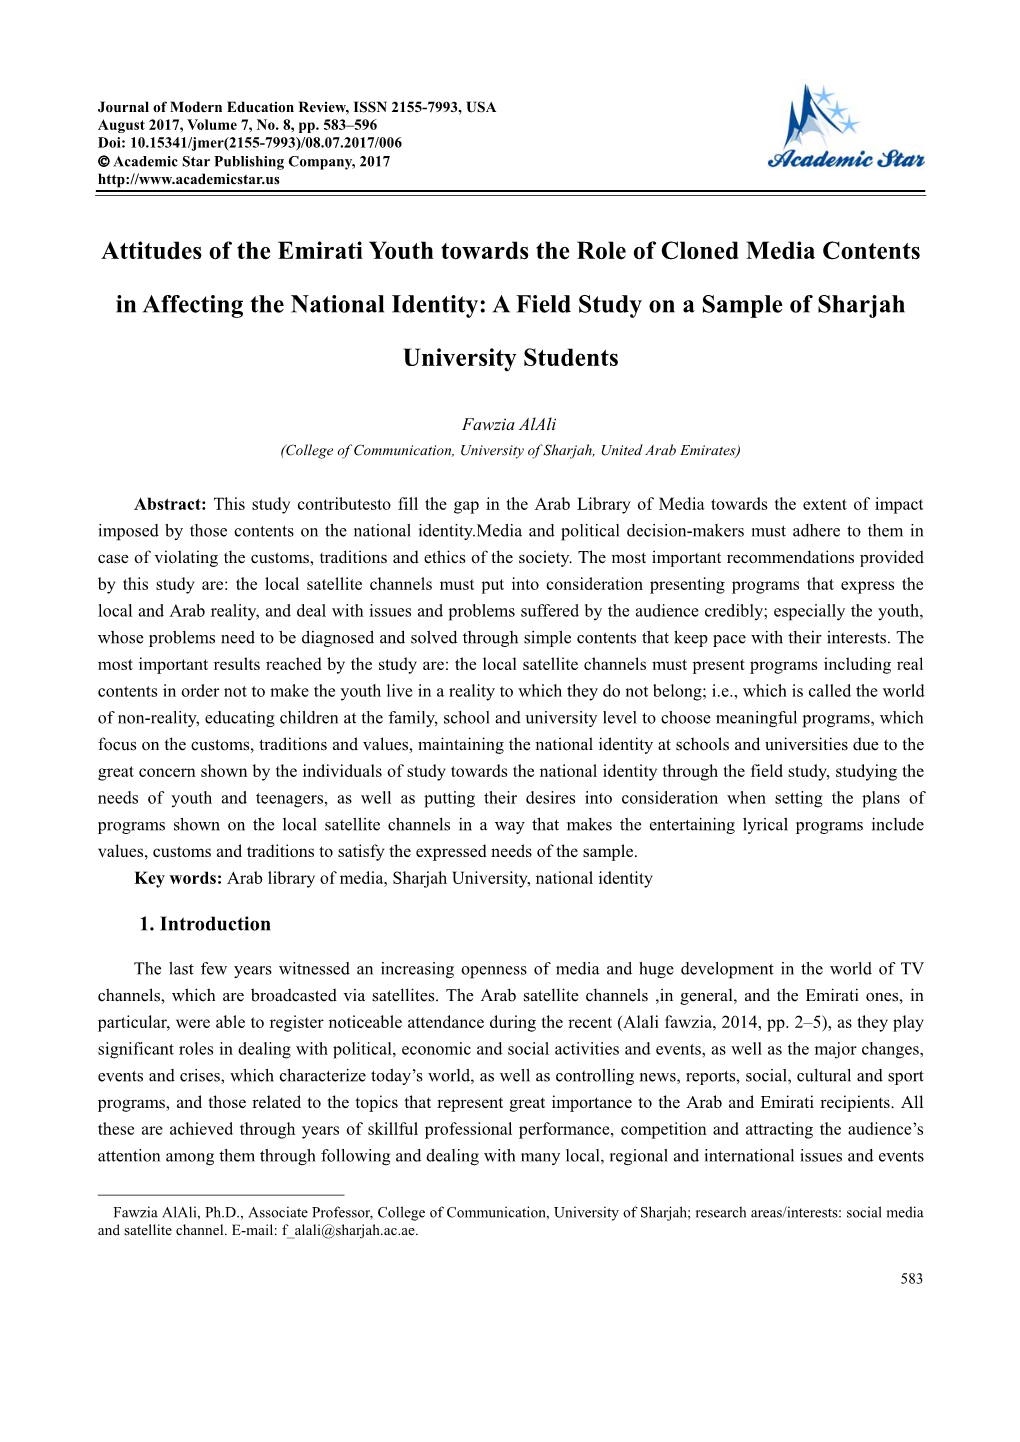 Attitudes of the Emirati Youth Towards the Role of Cloned Media Contents